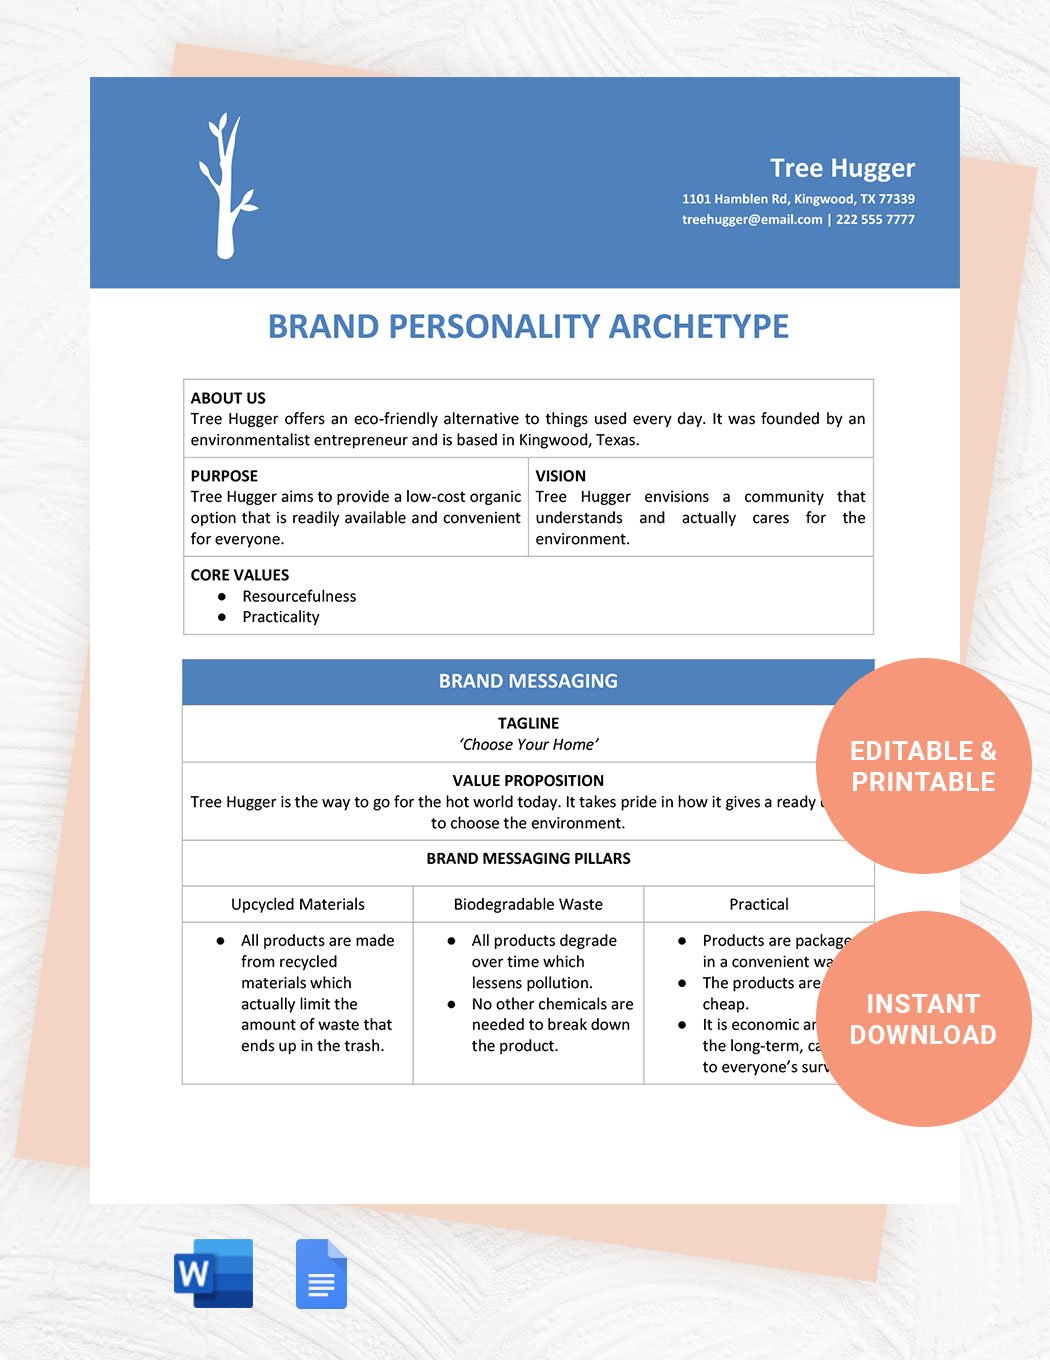 Brand Personality Archetype Template in Word, Google Docs